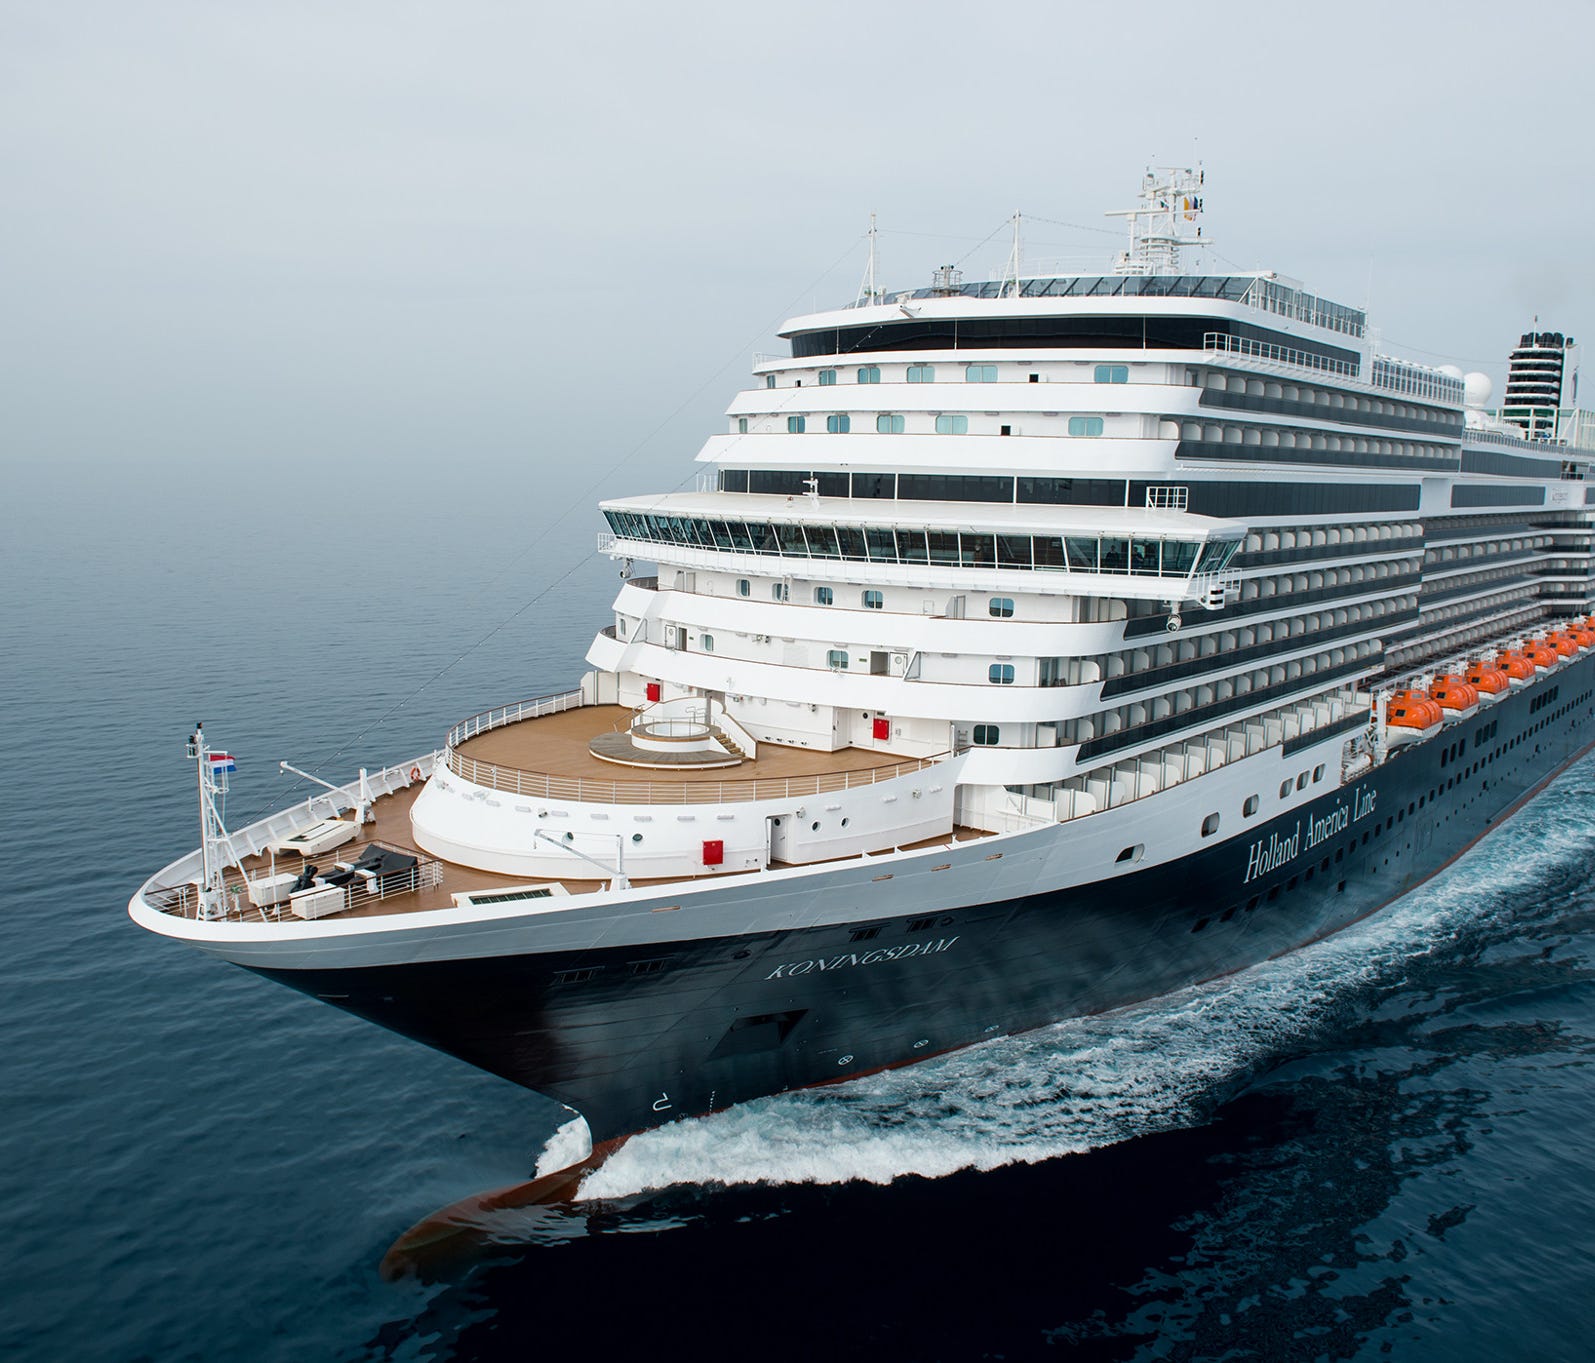 Holland America has a new ship on order for 2018 to be called Nieuw Statendam. Carrying 2,650 passengers at double occupancy, it'll be a sister to the one-year-old Koningsdam (shown here).